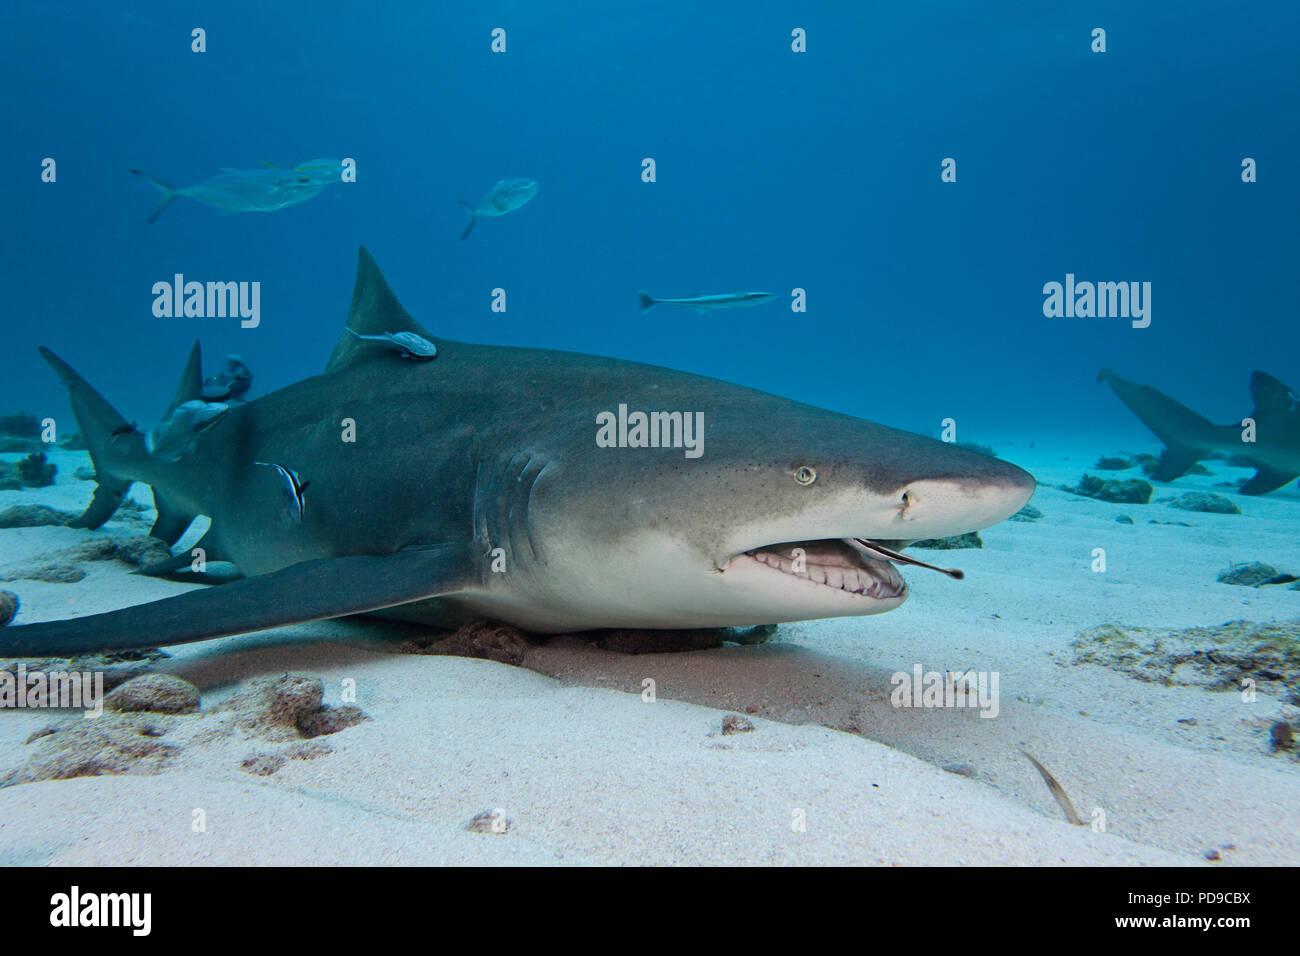 A remora or shark sucker, Echeneis naucrates, is pictured cleaning scraps from inside the mouth of a  lemon shark, Negaprion brevirostris, resting on  Stock Photo